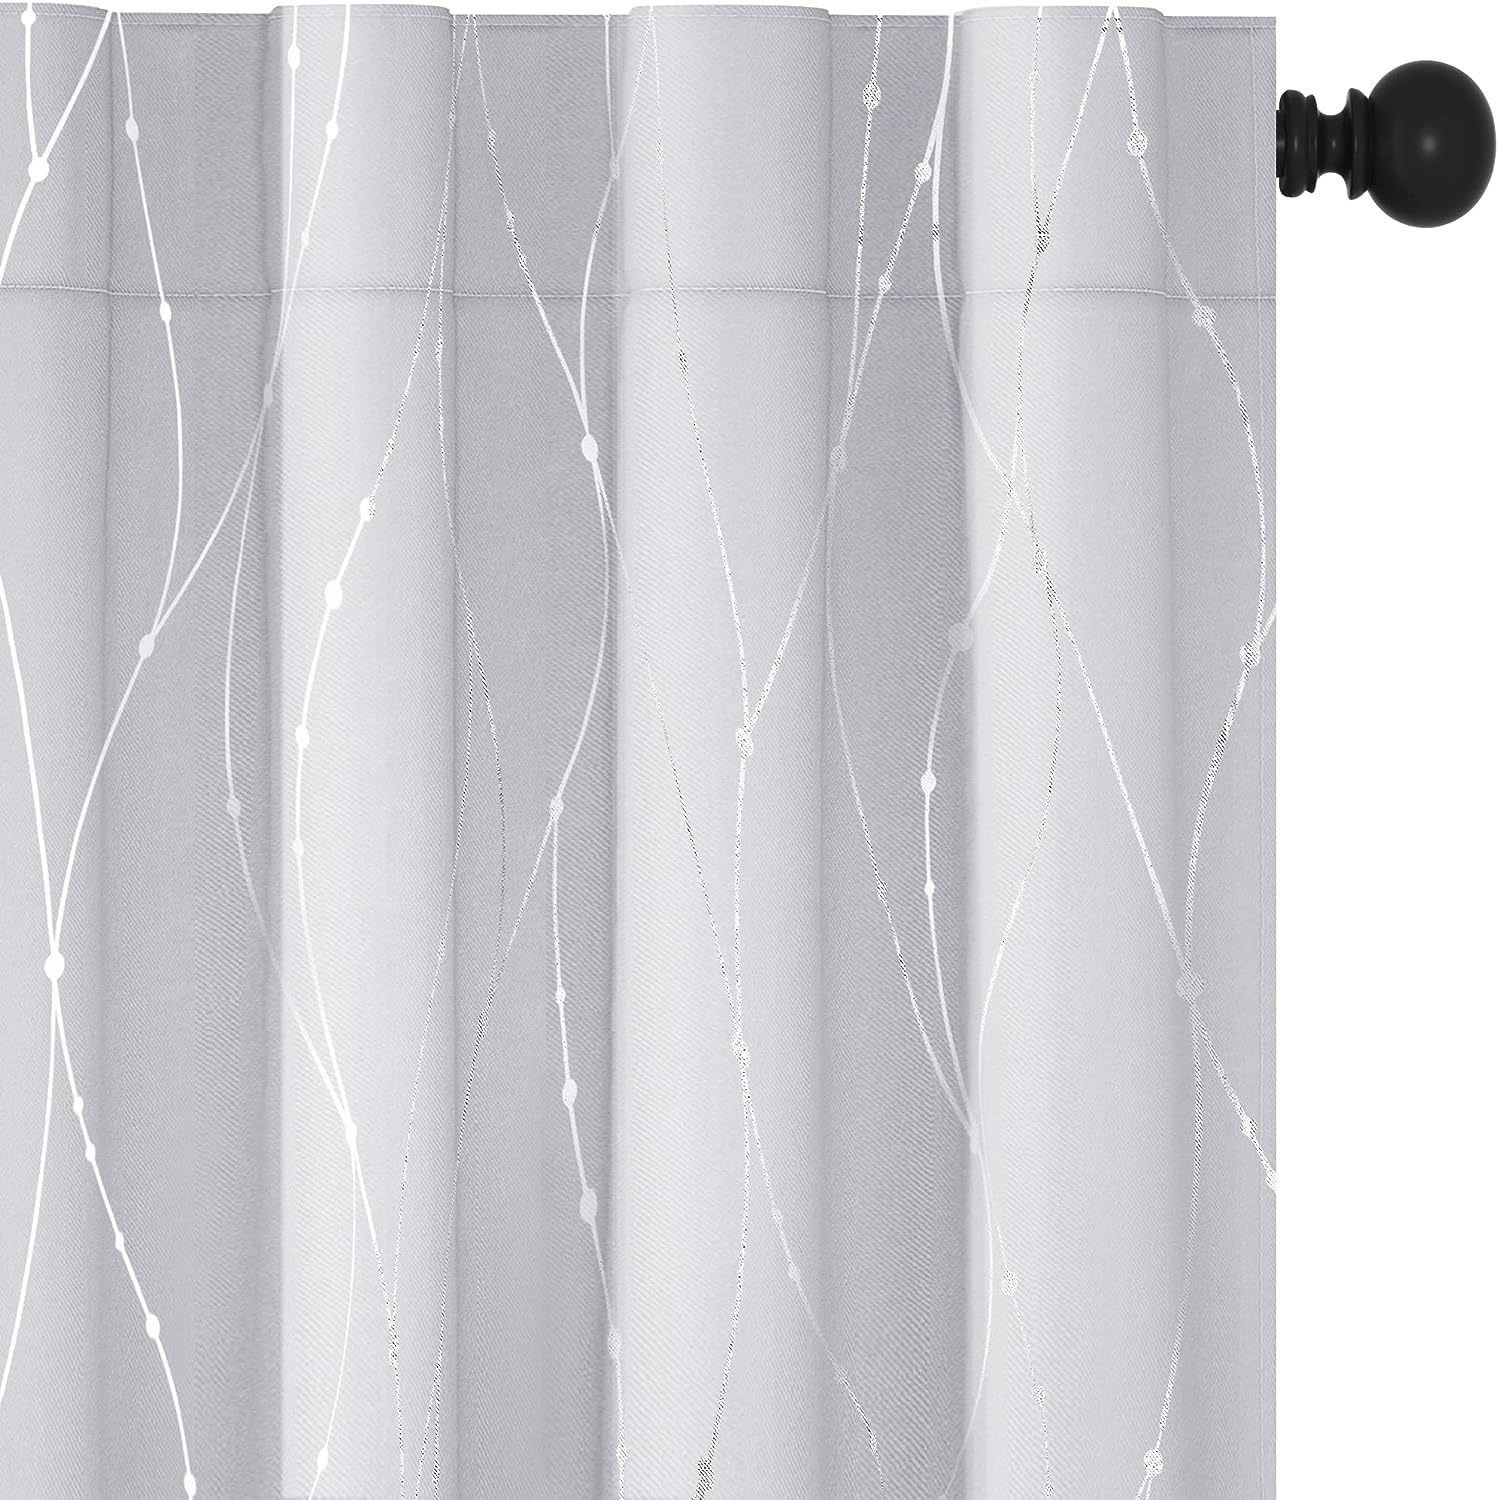 Deconovo White Curtains 84 Inches Long For Bedroom, Living Room Curtains And - $44.94